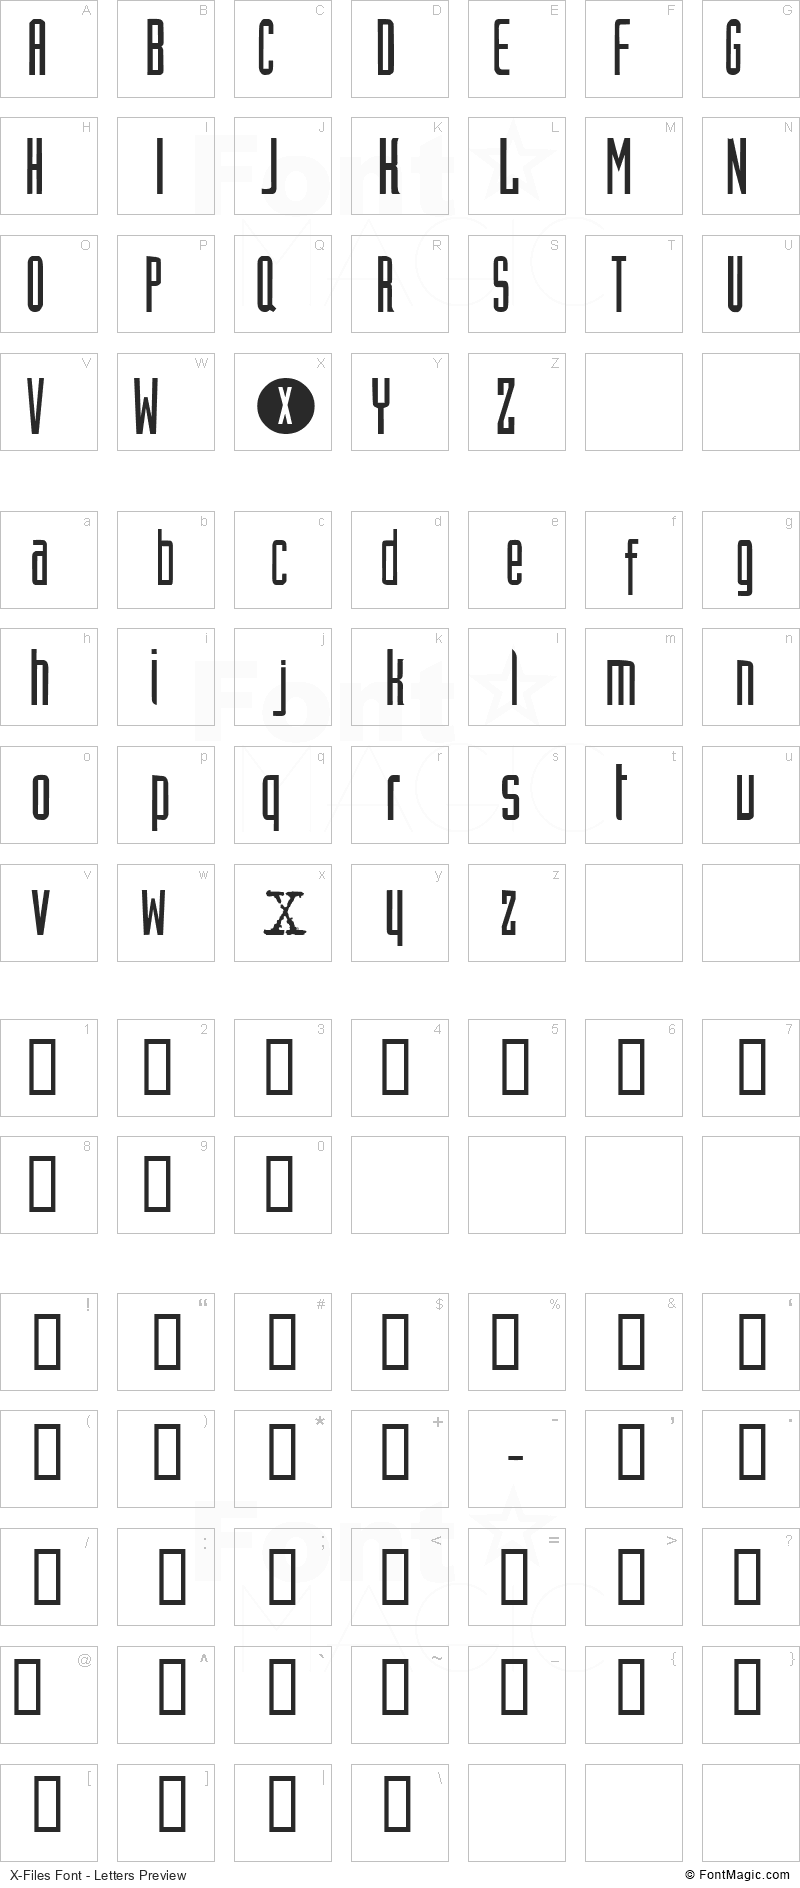 X-Files Font - All Latters Preview Chart